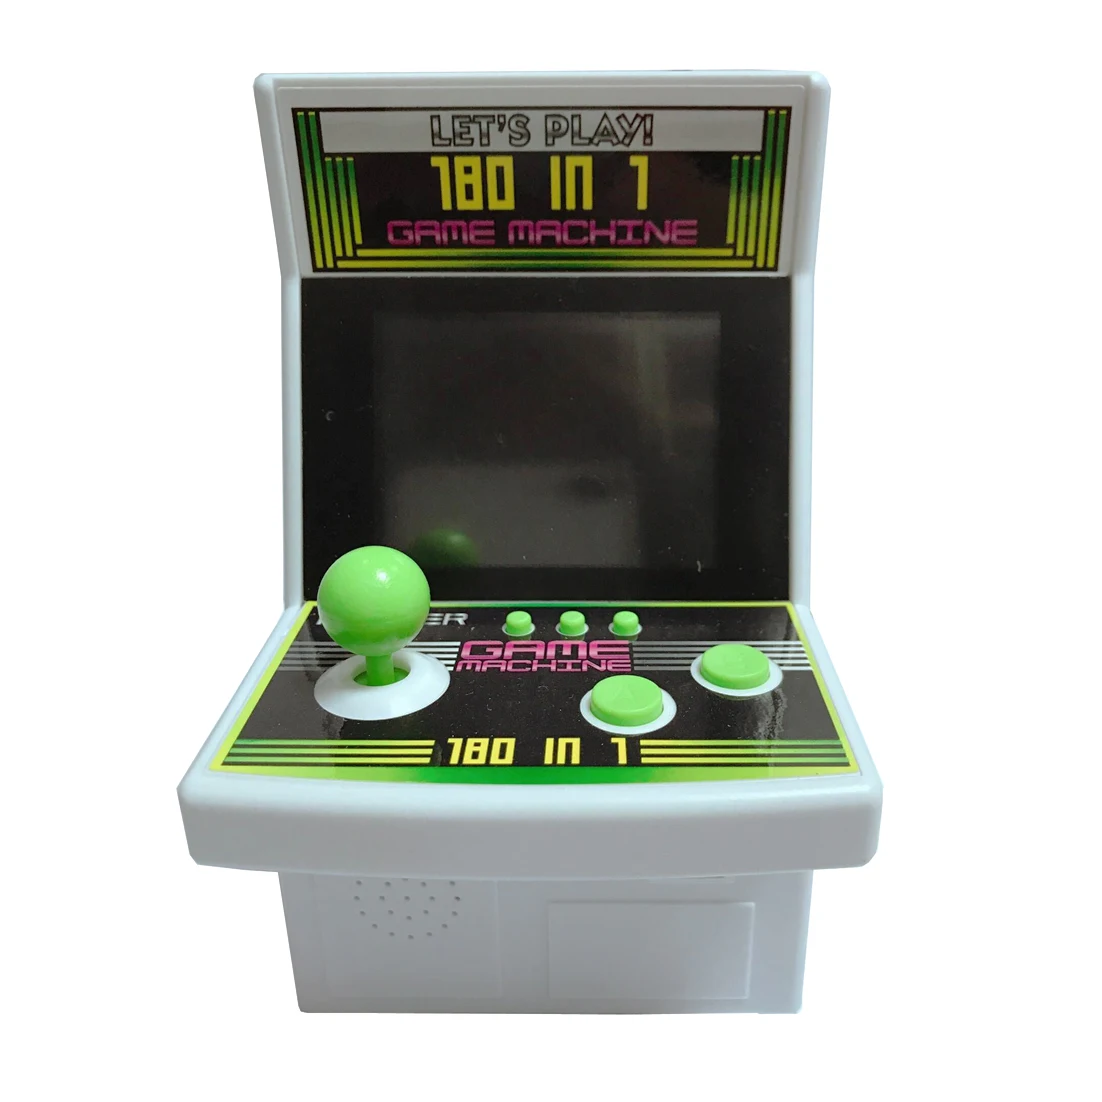 Retro Game Classic Arcade Game Machine With 2 8 Inch Display 180